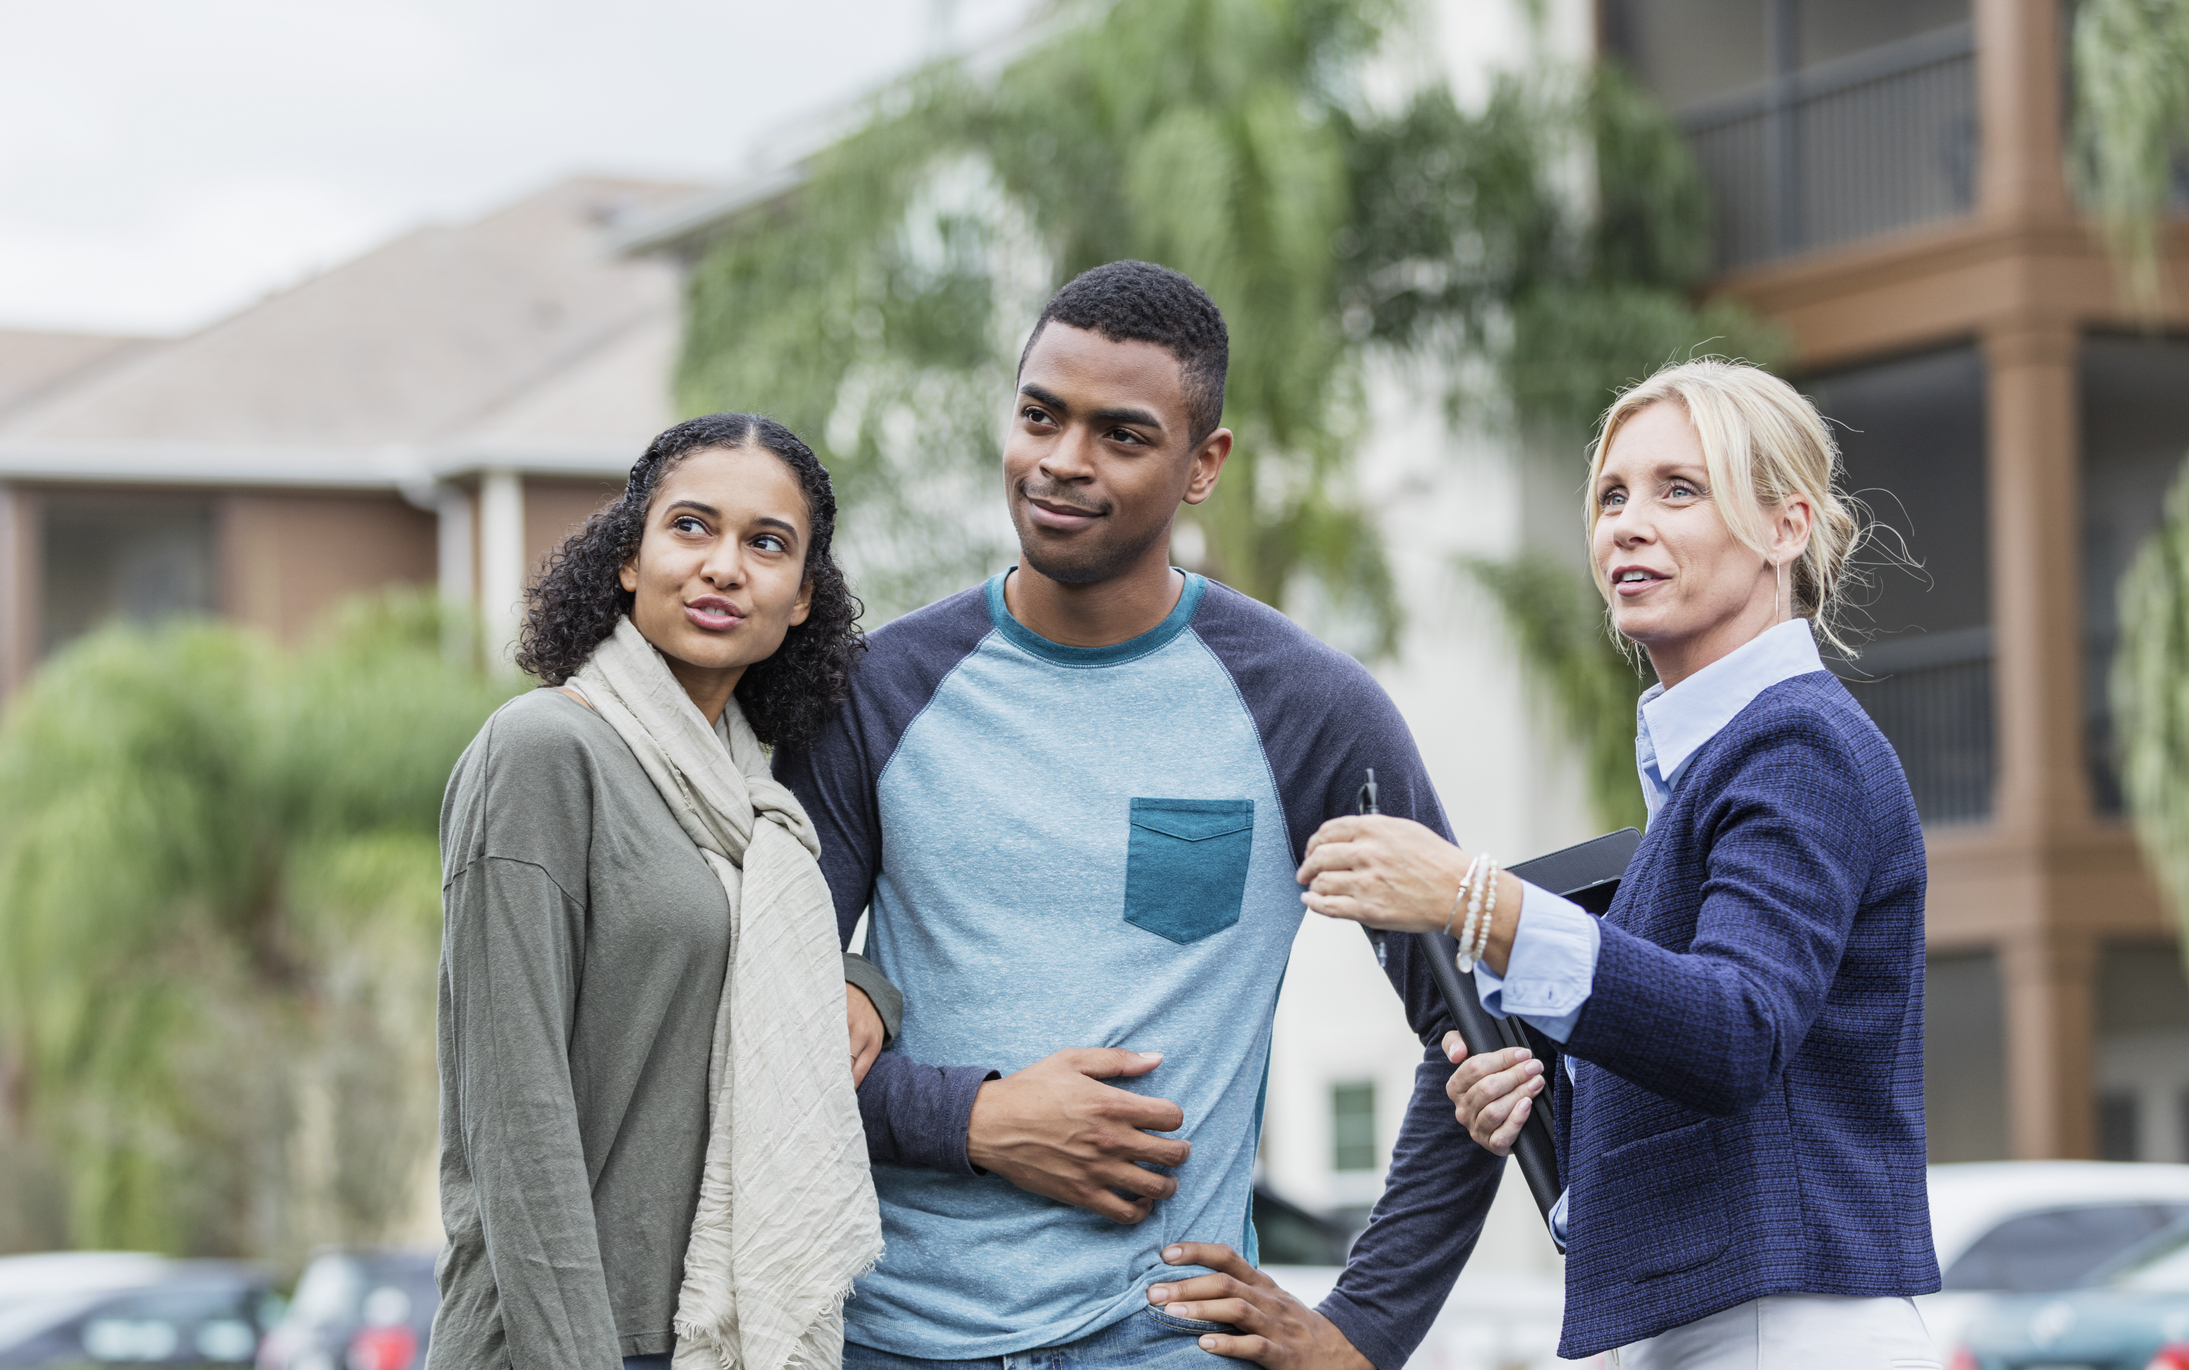 Stock Photo of a Couple and a Real Estate Agent Standing Outside Looking Toward a Home